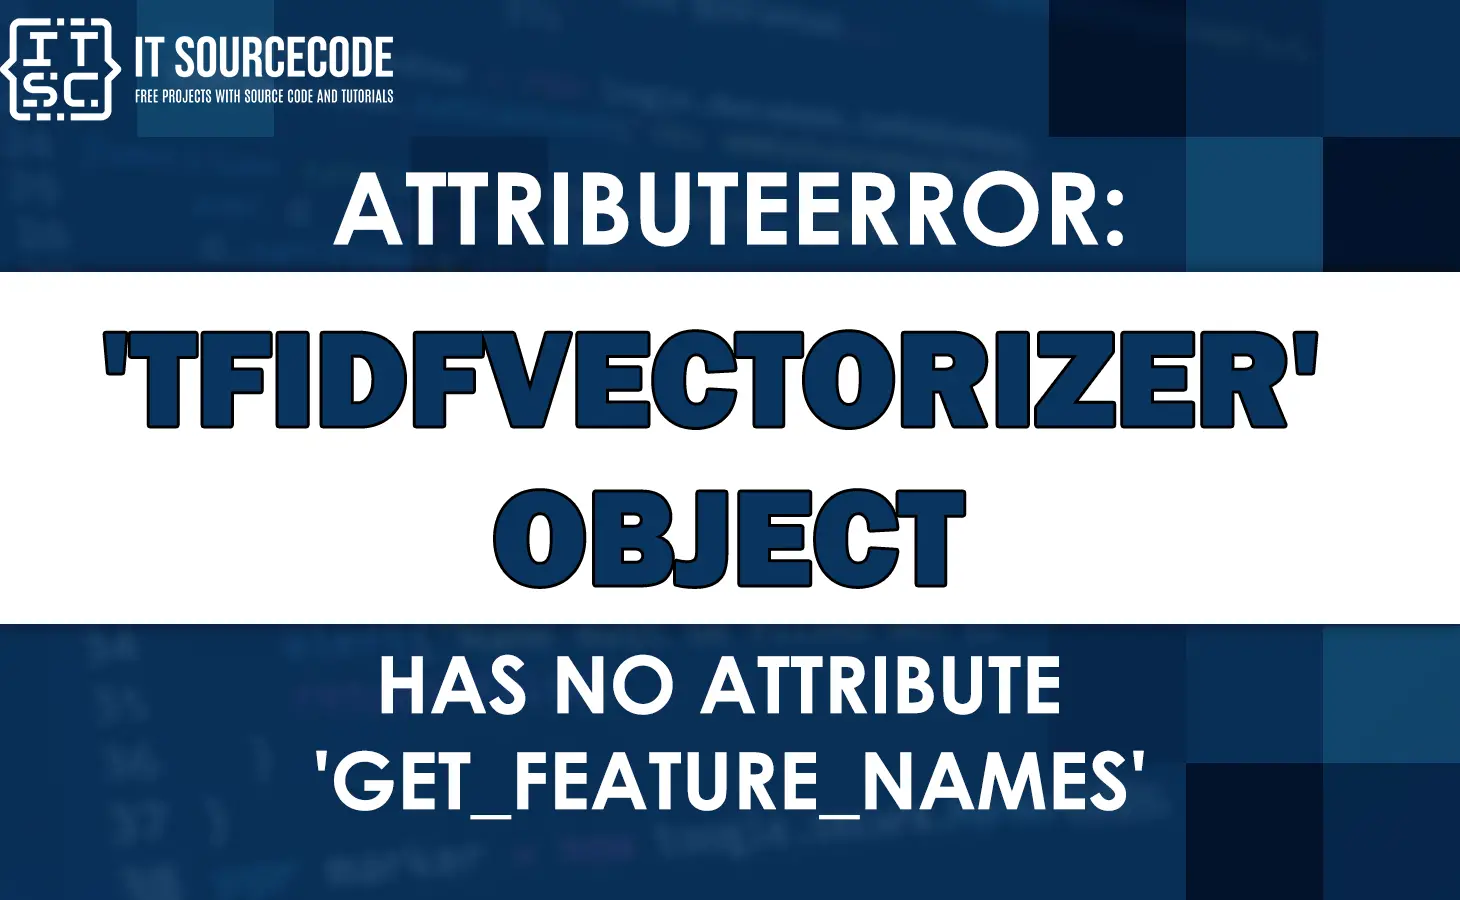 Attributeerror: 'tfidfvectorizer' object has no attribute 'get_feature_names'